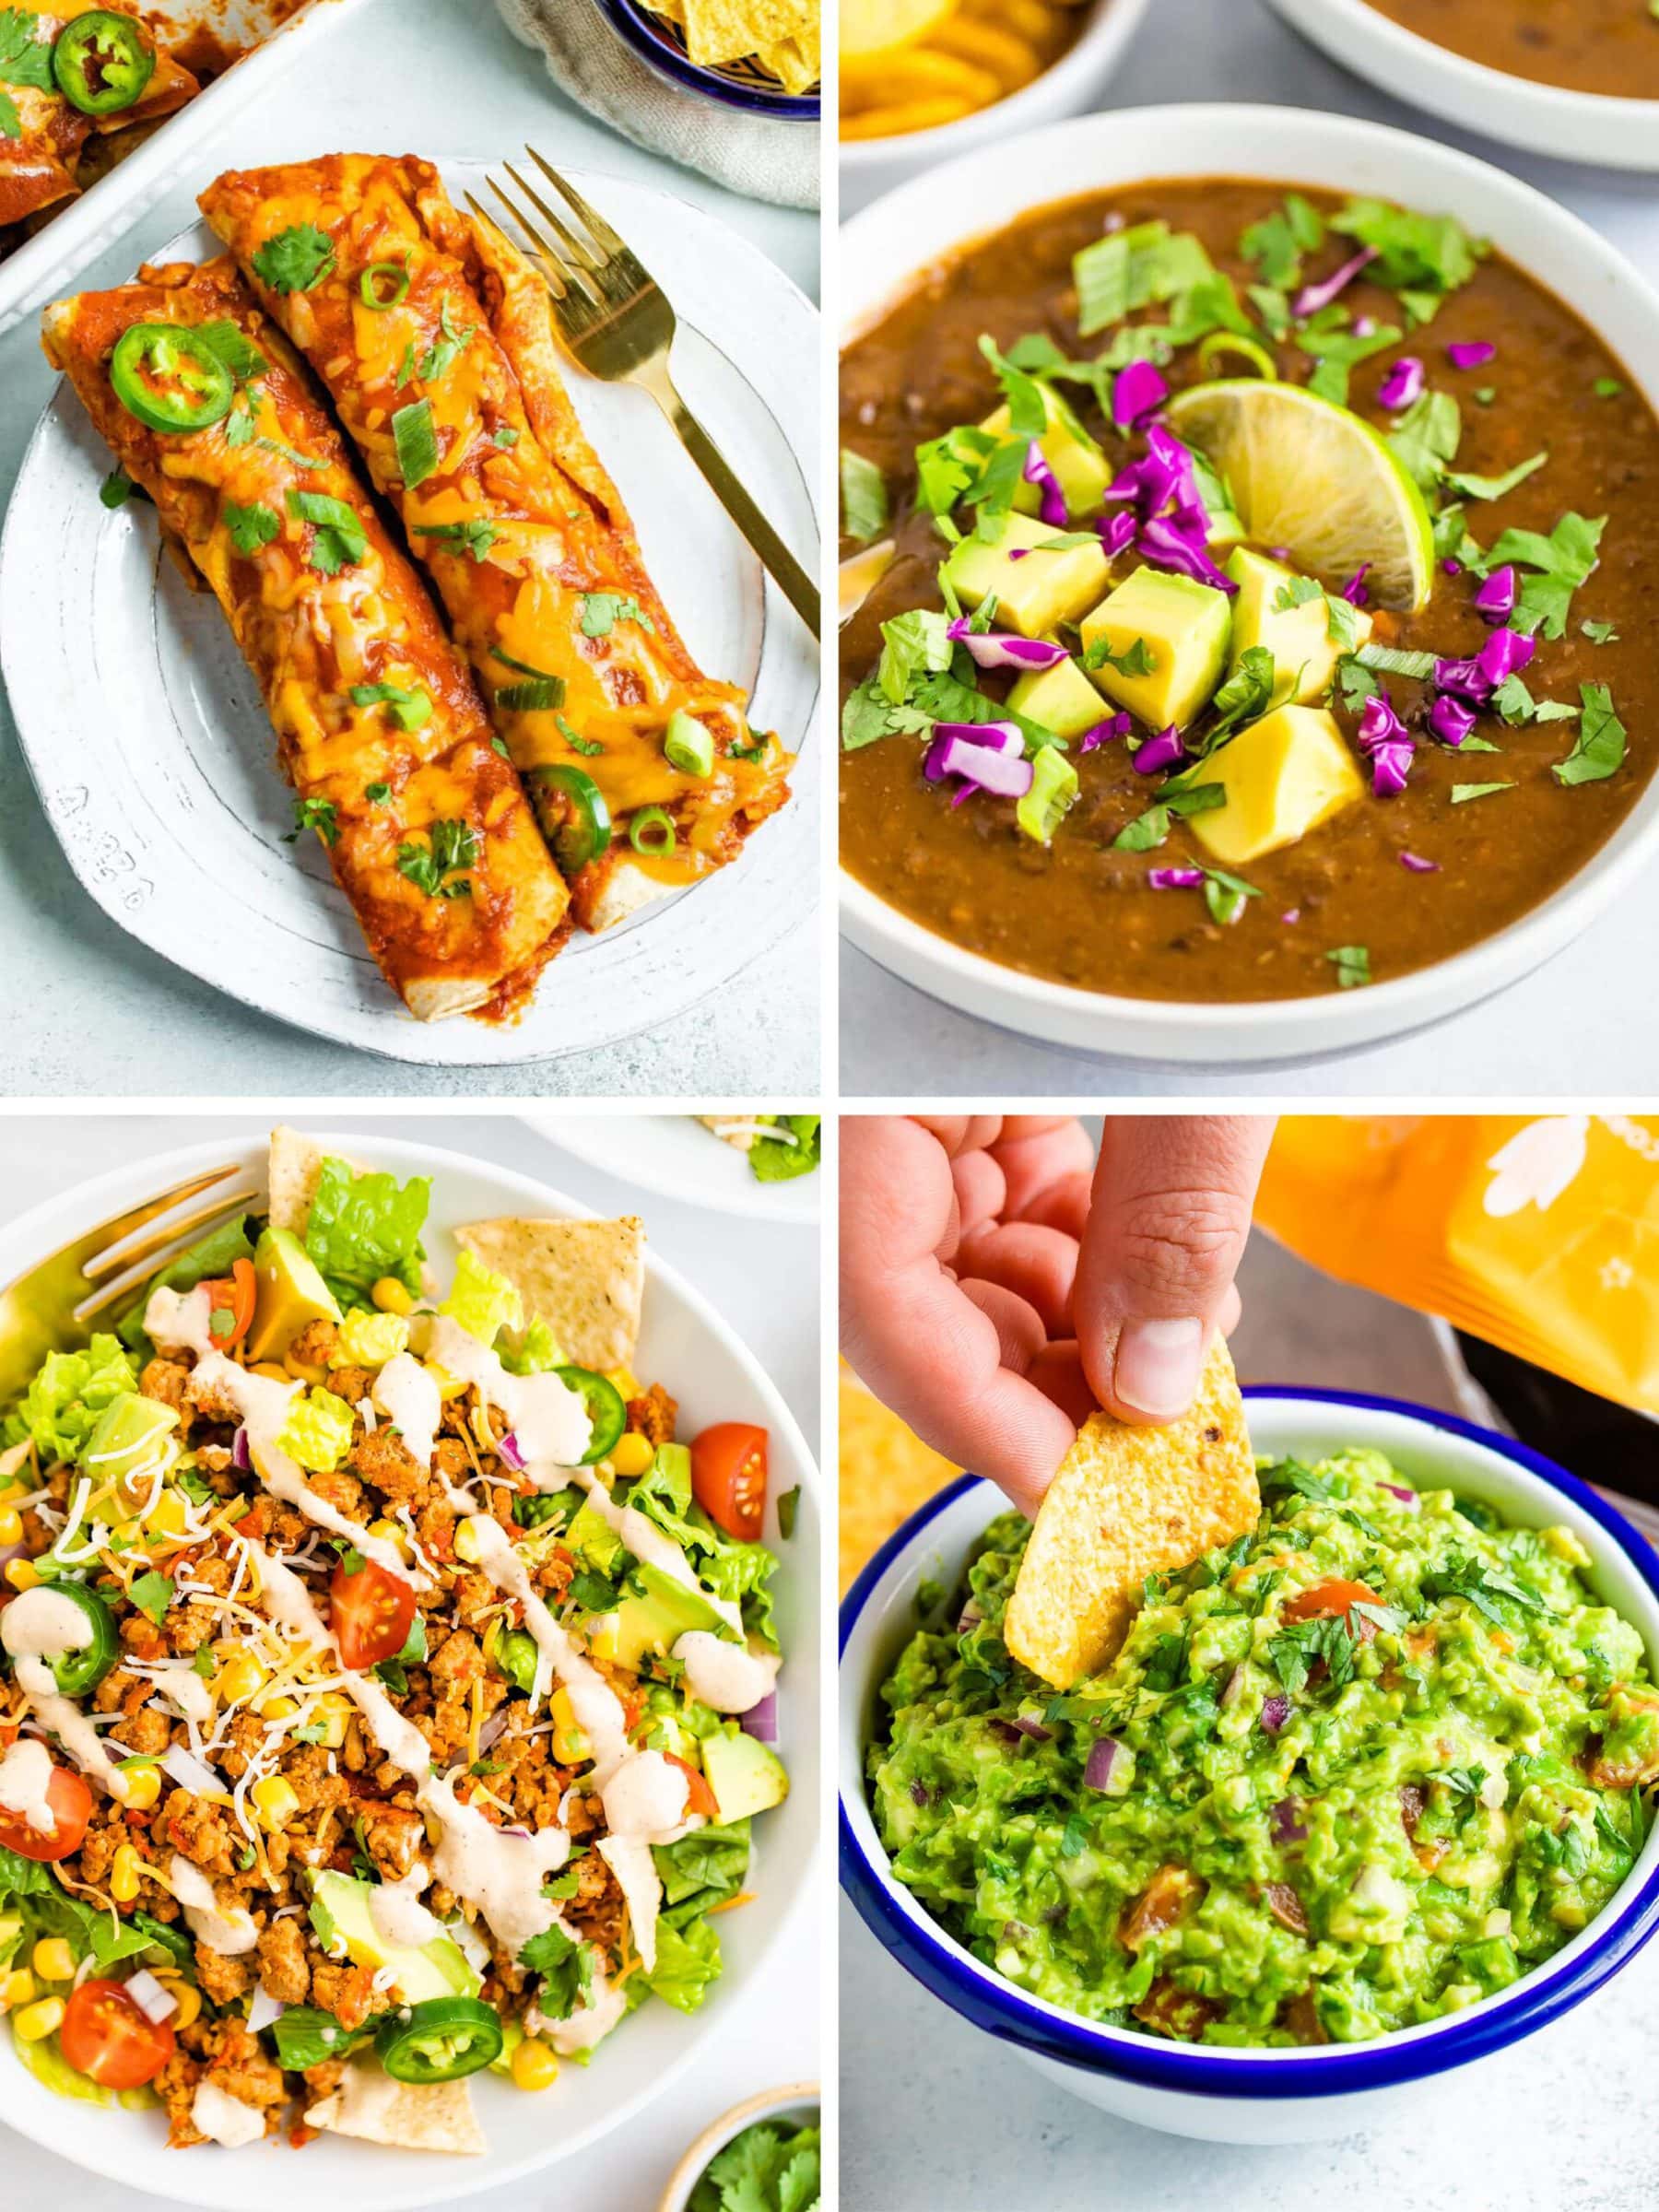 Deliciously Nutritious: Healthy Mexican Food at Restaurants